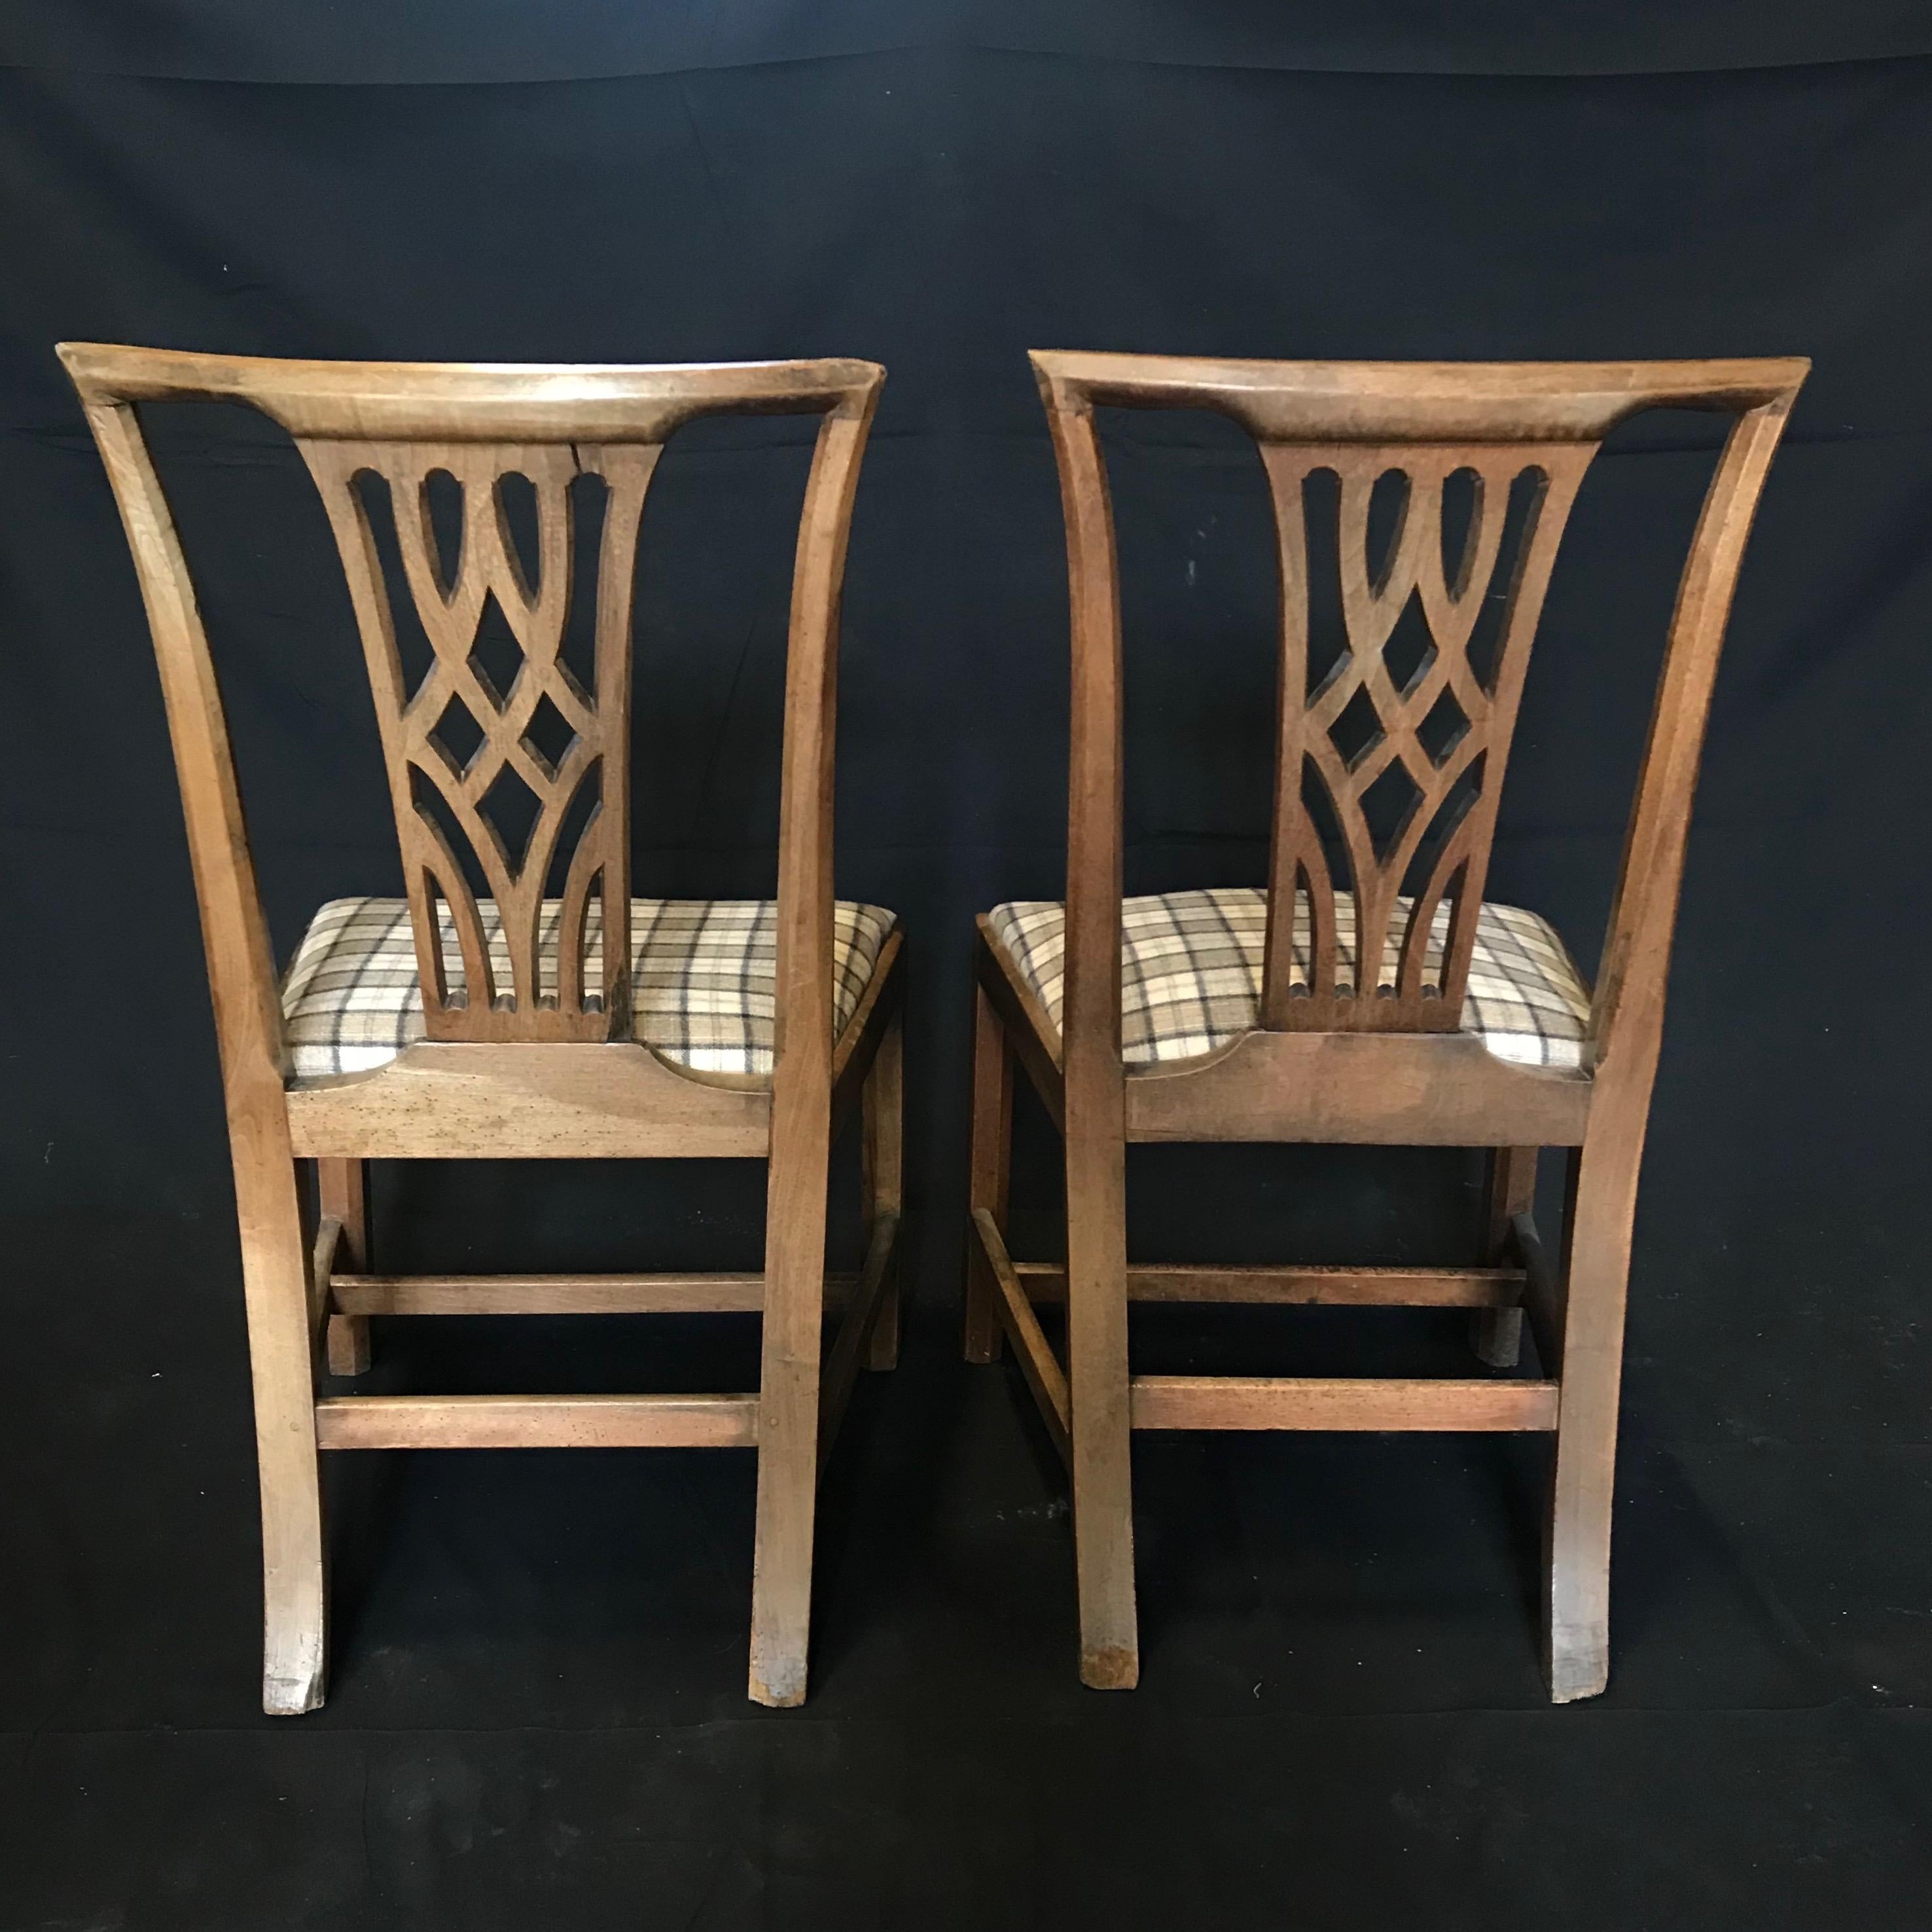 Super pair of early British oak side dining chairs circa late 18th-early 19th century with gorgeous patina, newly upholstered in complementary British tartan. Solid and early! #4575
Measures: H 38 5/8” x H seat 19” x W 21.25” x D 21.5”.